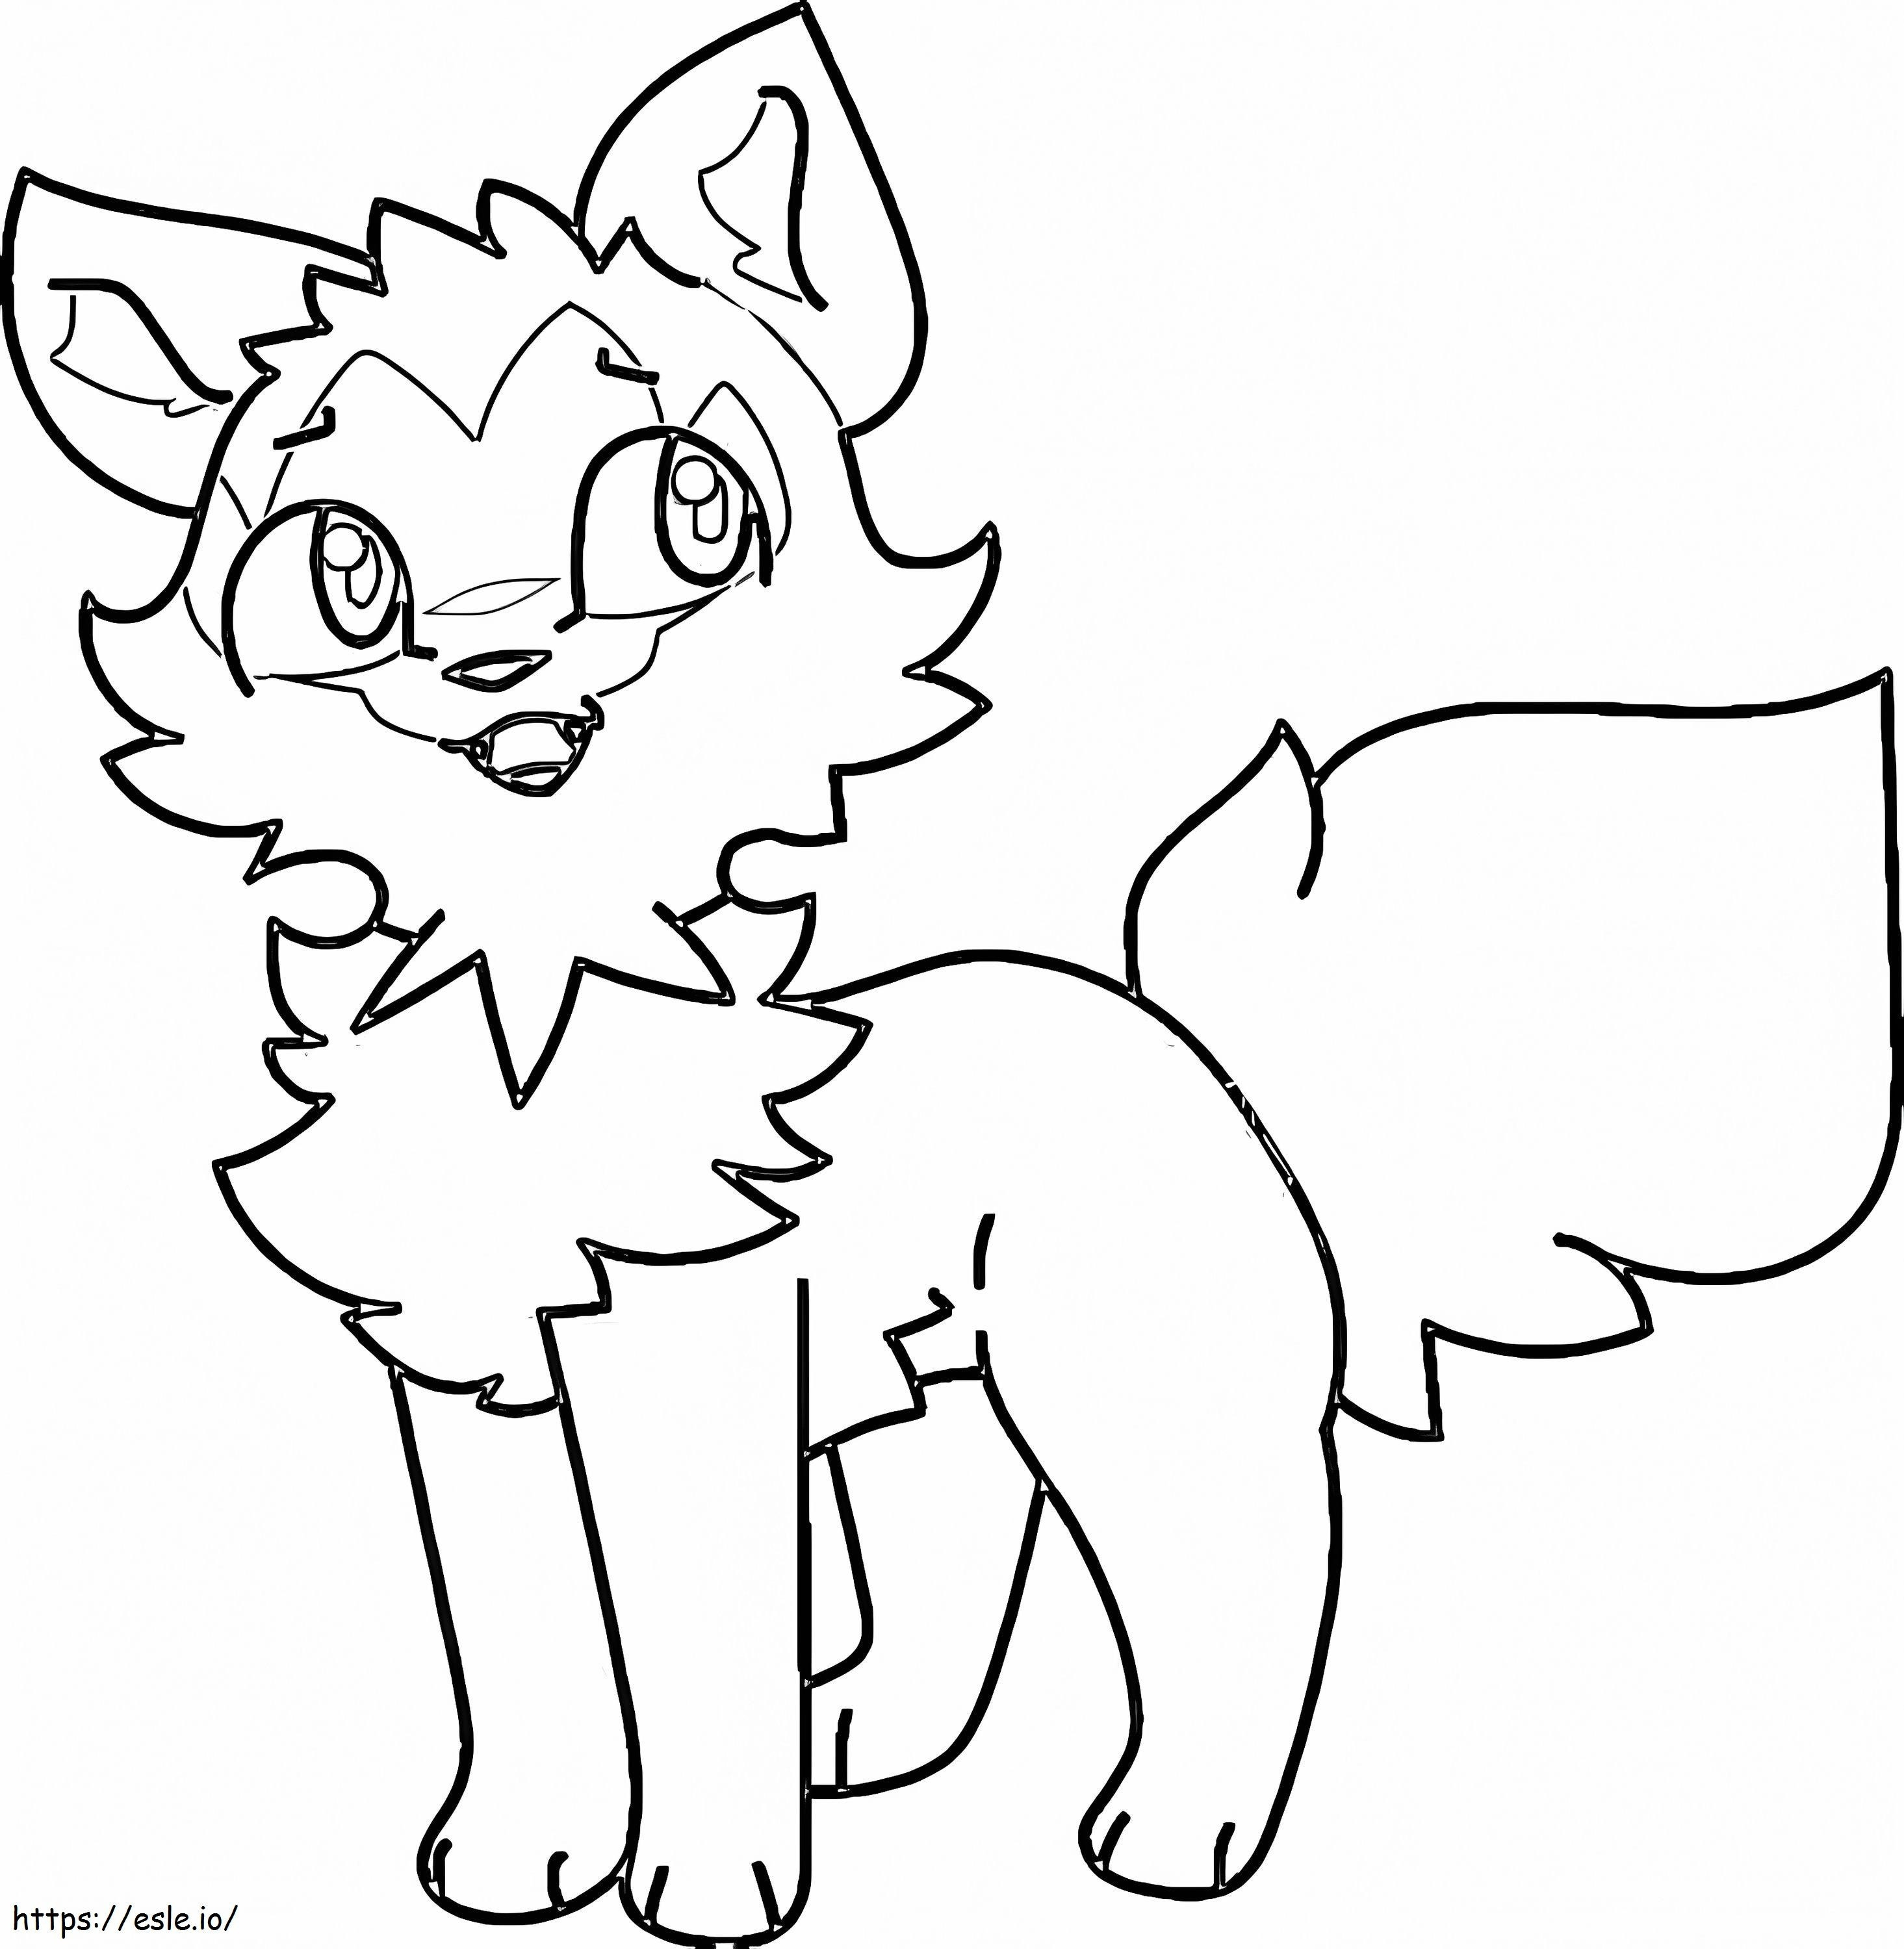 Lovely Sprigatito coloring page